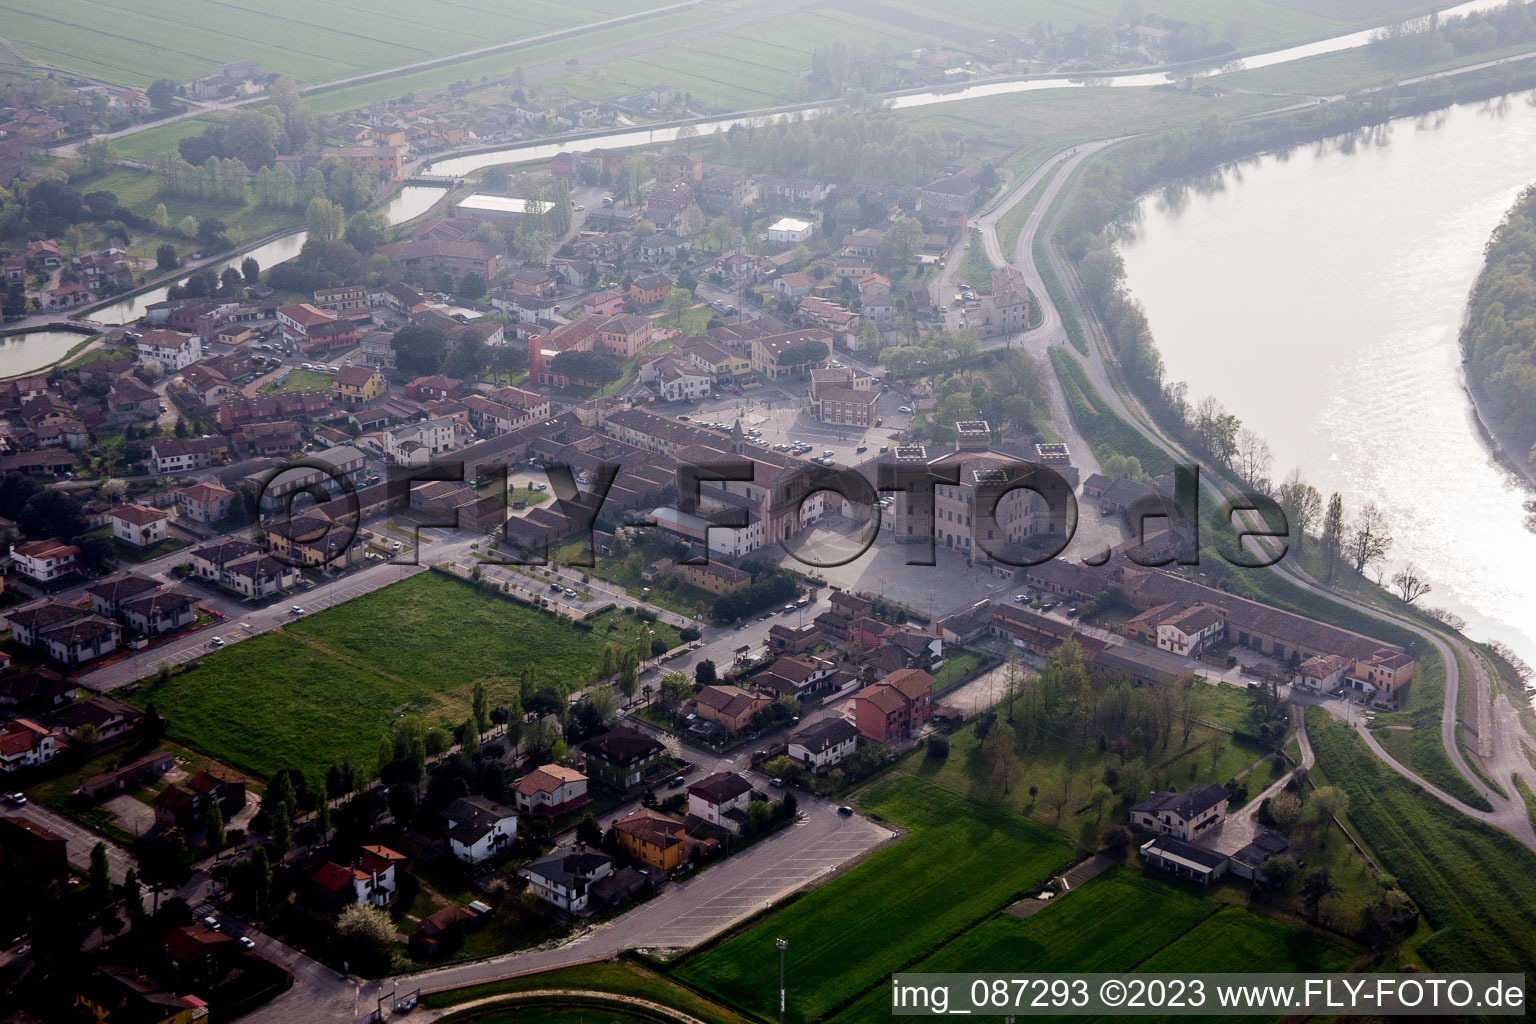 Aerial view of Mesola in the state Emilia Romagna, Italy